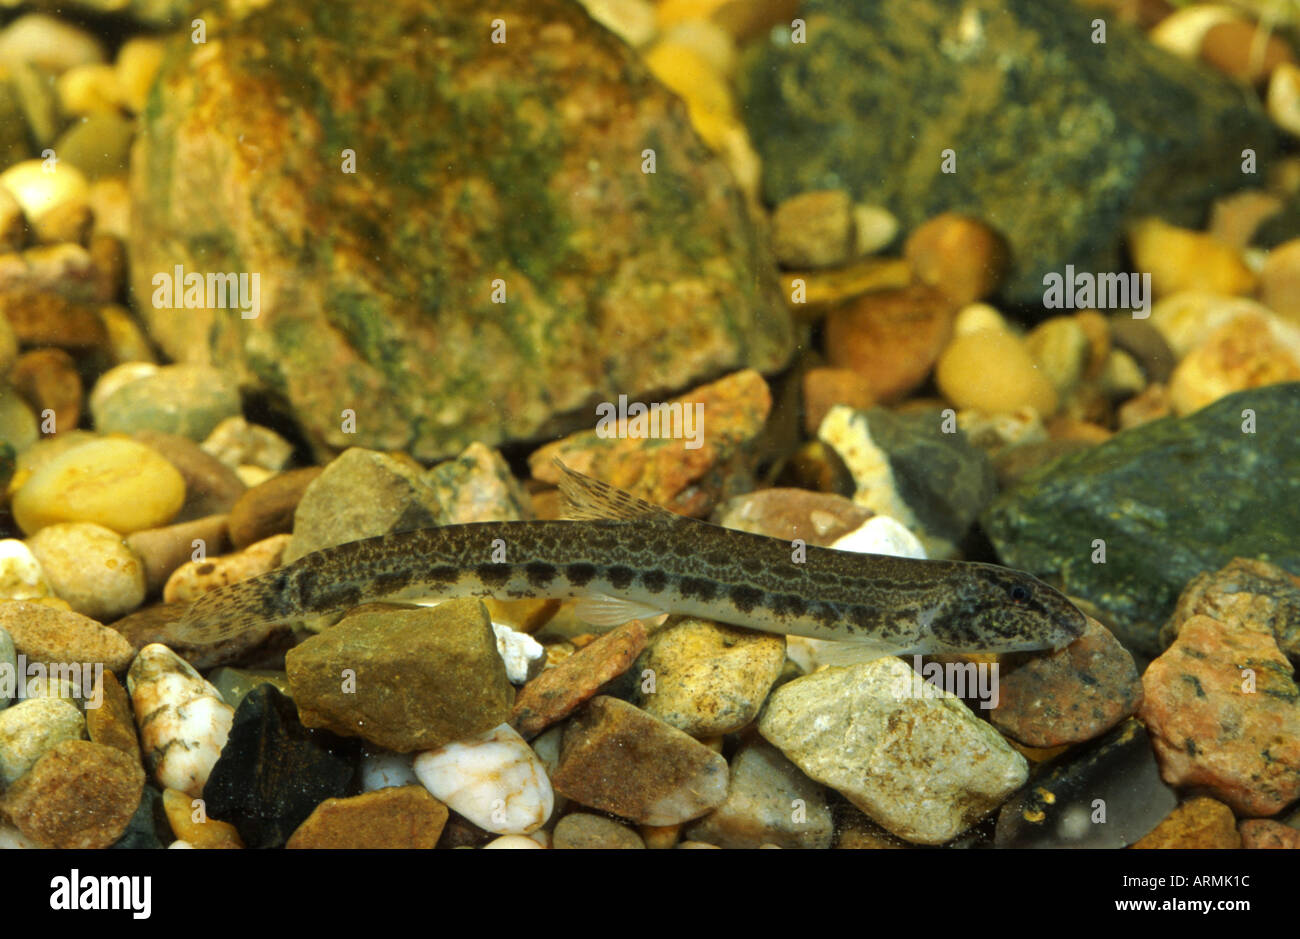 spined loach, spotted weatherfish (Cobitis taenia), portrait of a single animal Stock Photo